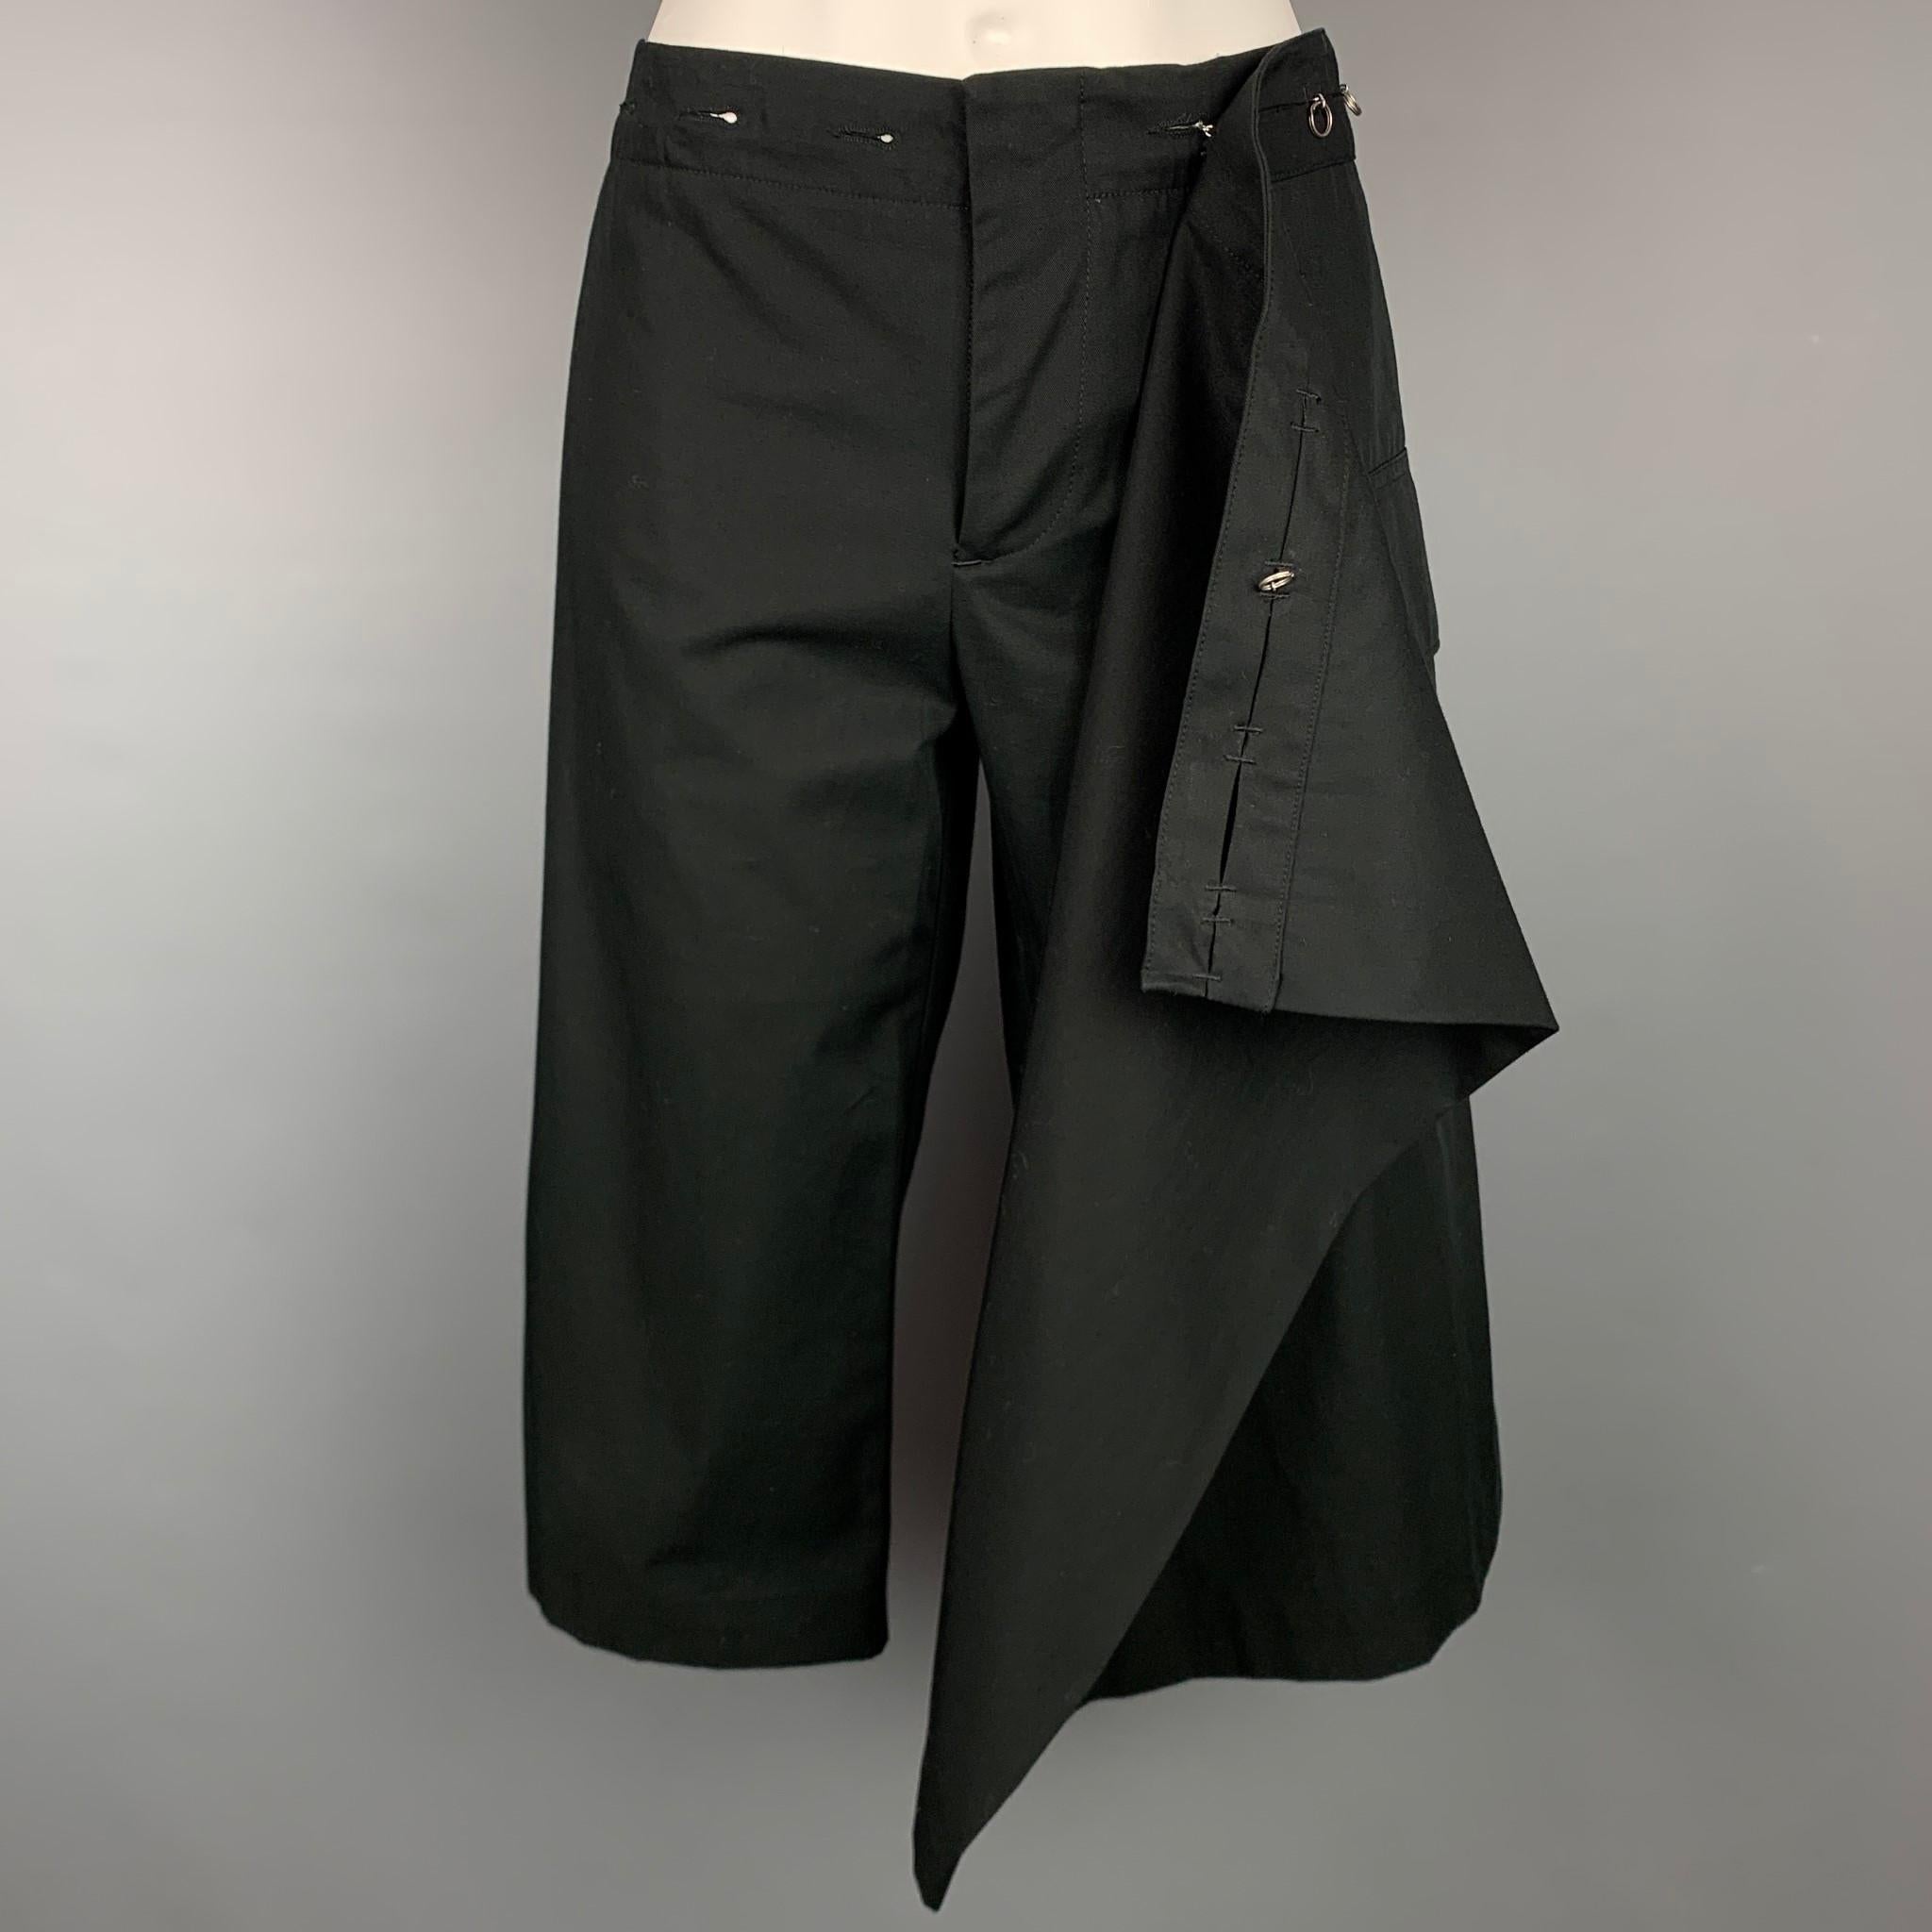 JEAN PAUL GAULTIER FEMME shorts comes in a black twill cotton with a skirt panel design featuring a cargo pocket, front tab, silver tone hardware, and a zip fly closure. Made in Italy. 

Very Good Pre-Owned Condition.
Marked: I 42 / D 38 / F 38 / GB